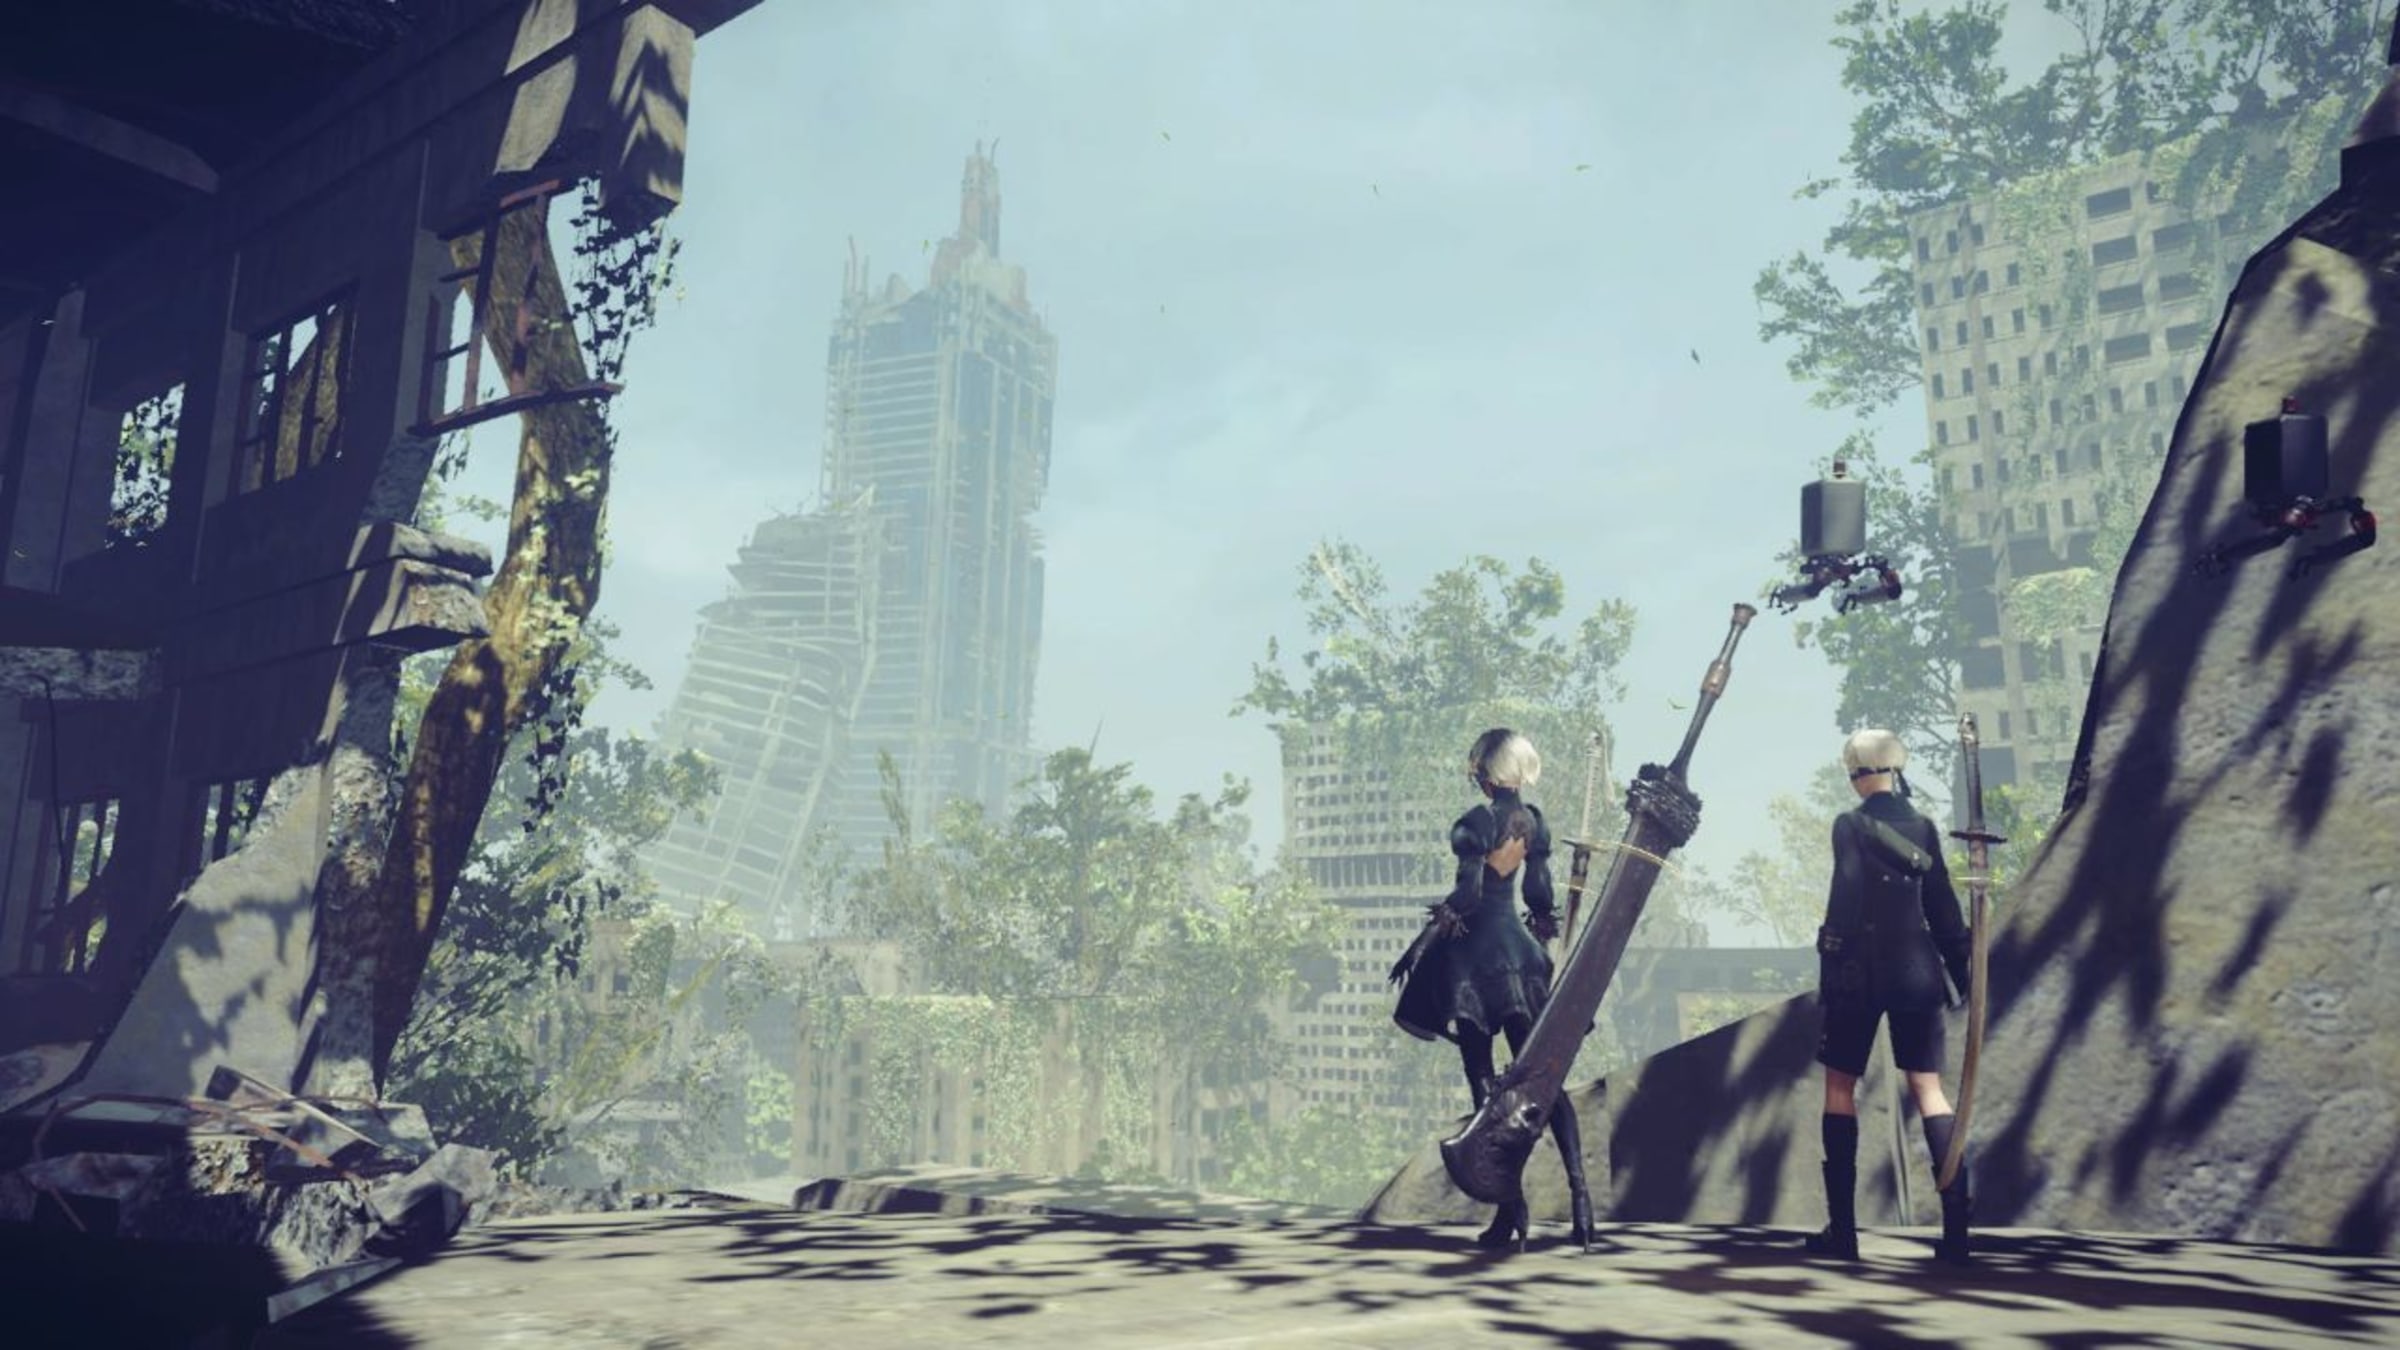 https://assets.nintendo.com/image/upload/c_fill,w_1200/q_auto:best/f_auto/dpr_2.0/ncom/en_US/games/switch/n/nier-automata-the-end-of-yorha-edition-switch/